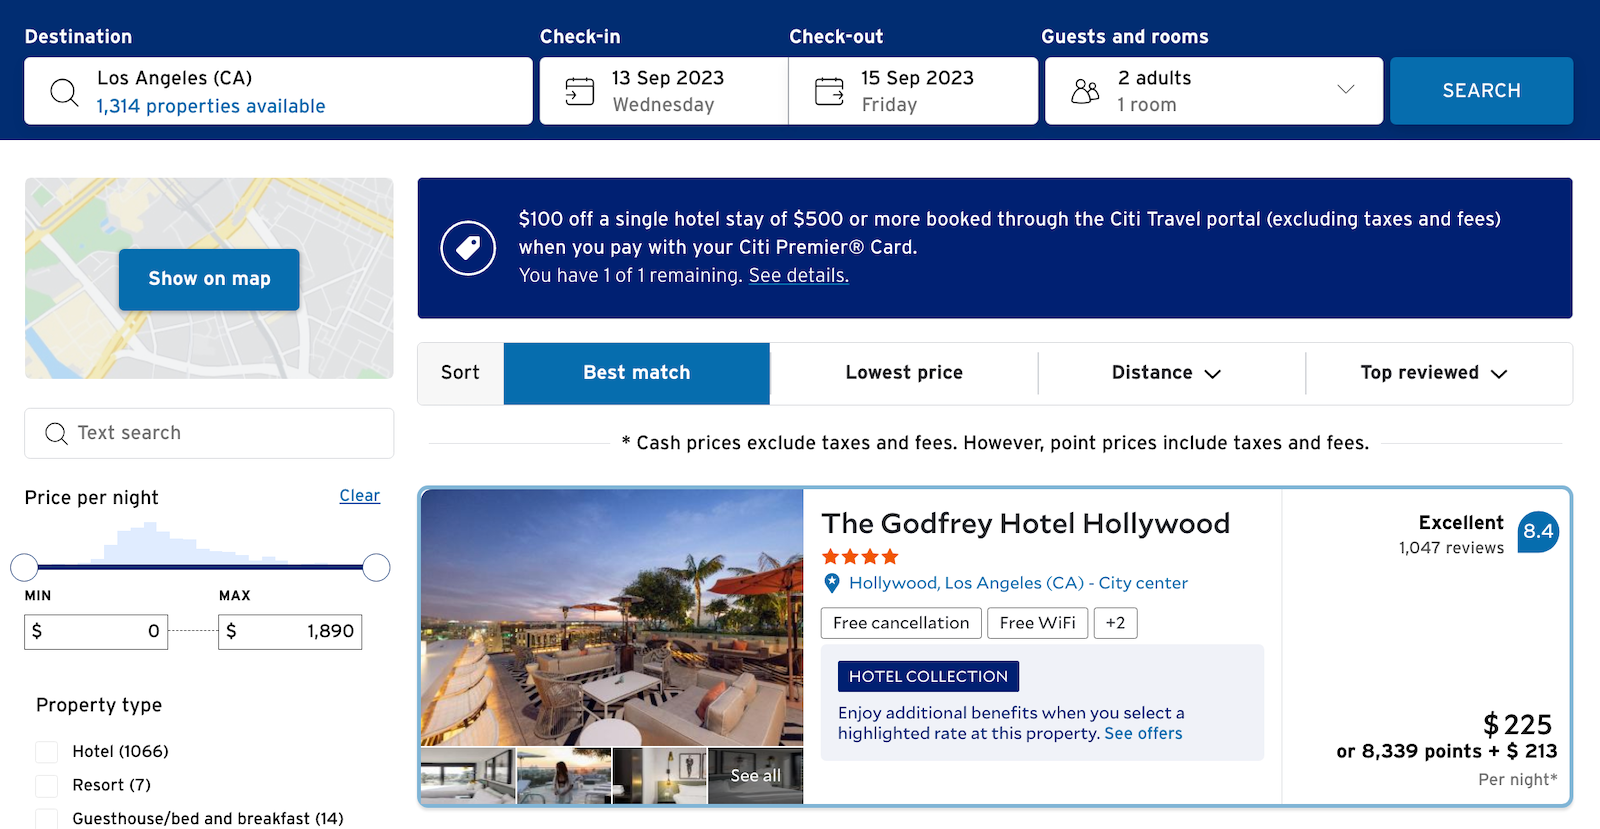 hotel search results for Los Angeles in a travel portal with the top property showing a label that it's in Citi's Hotel Collection